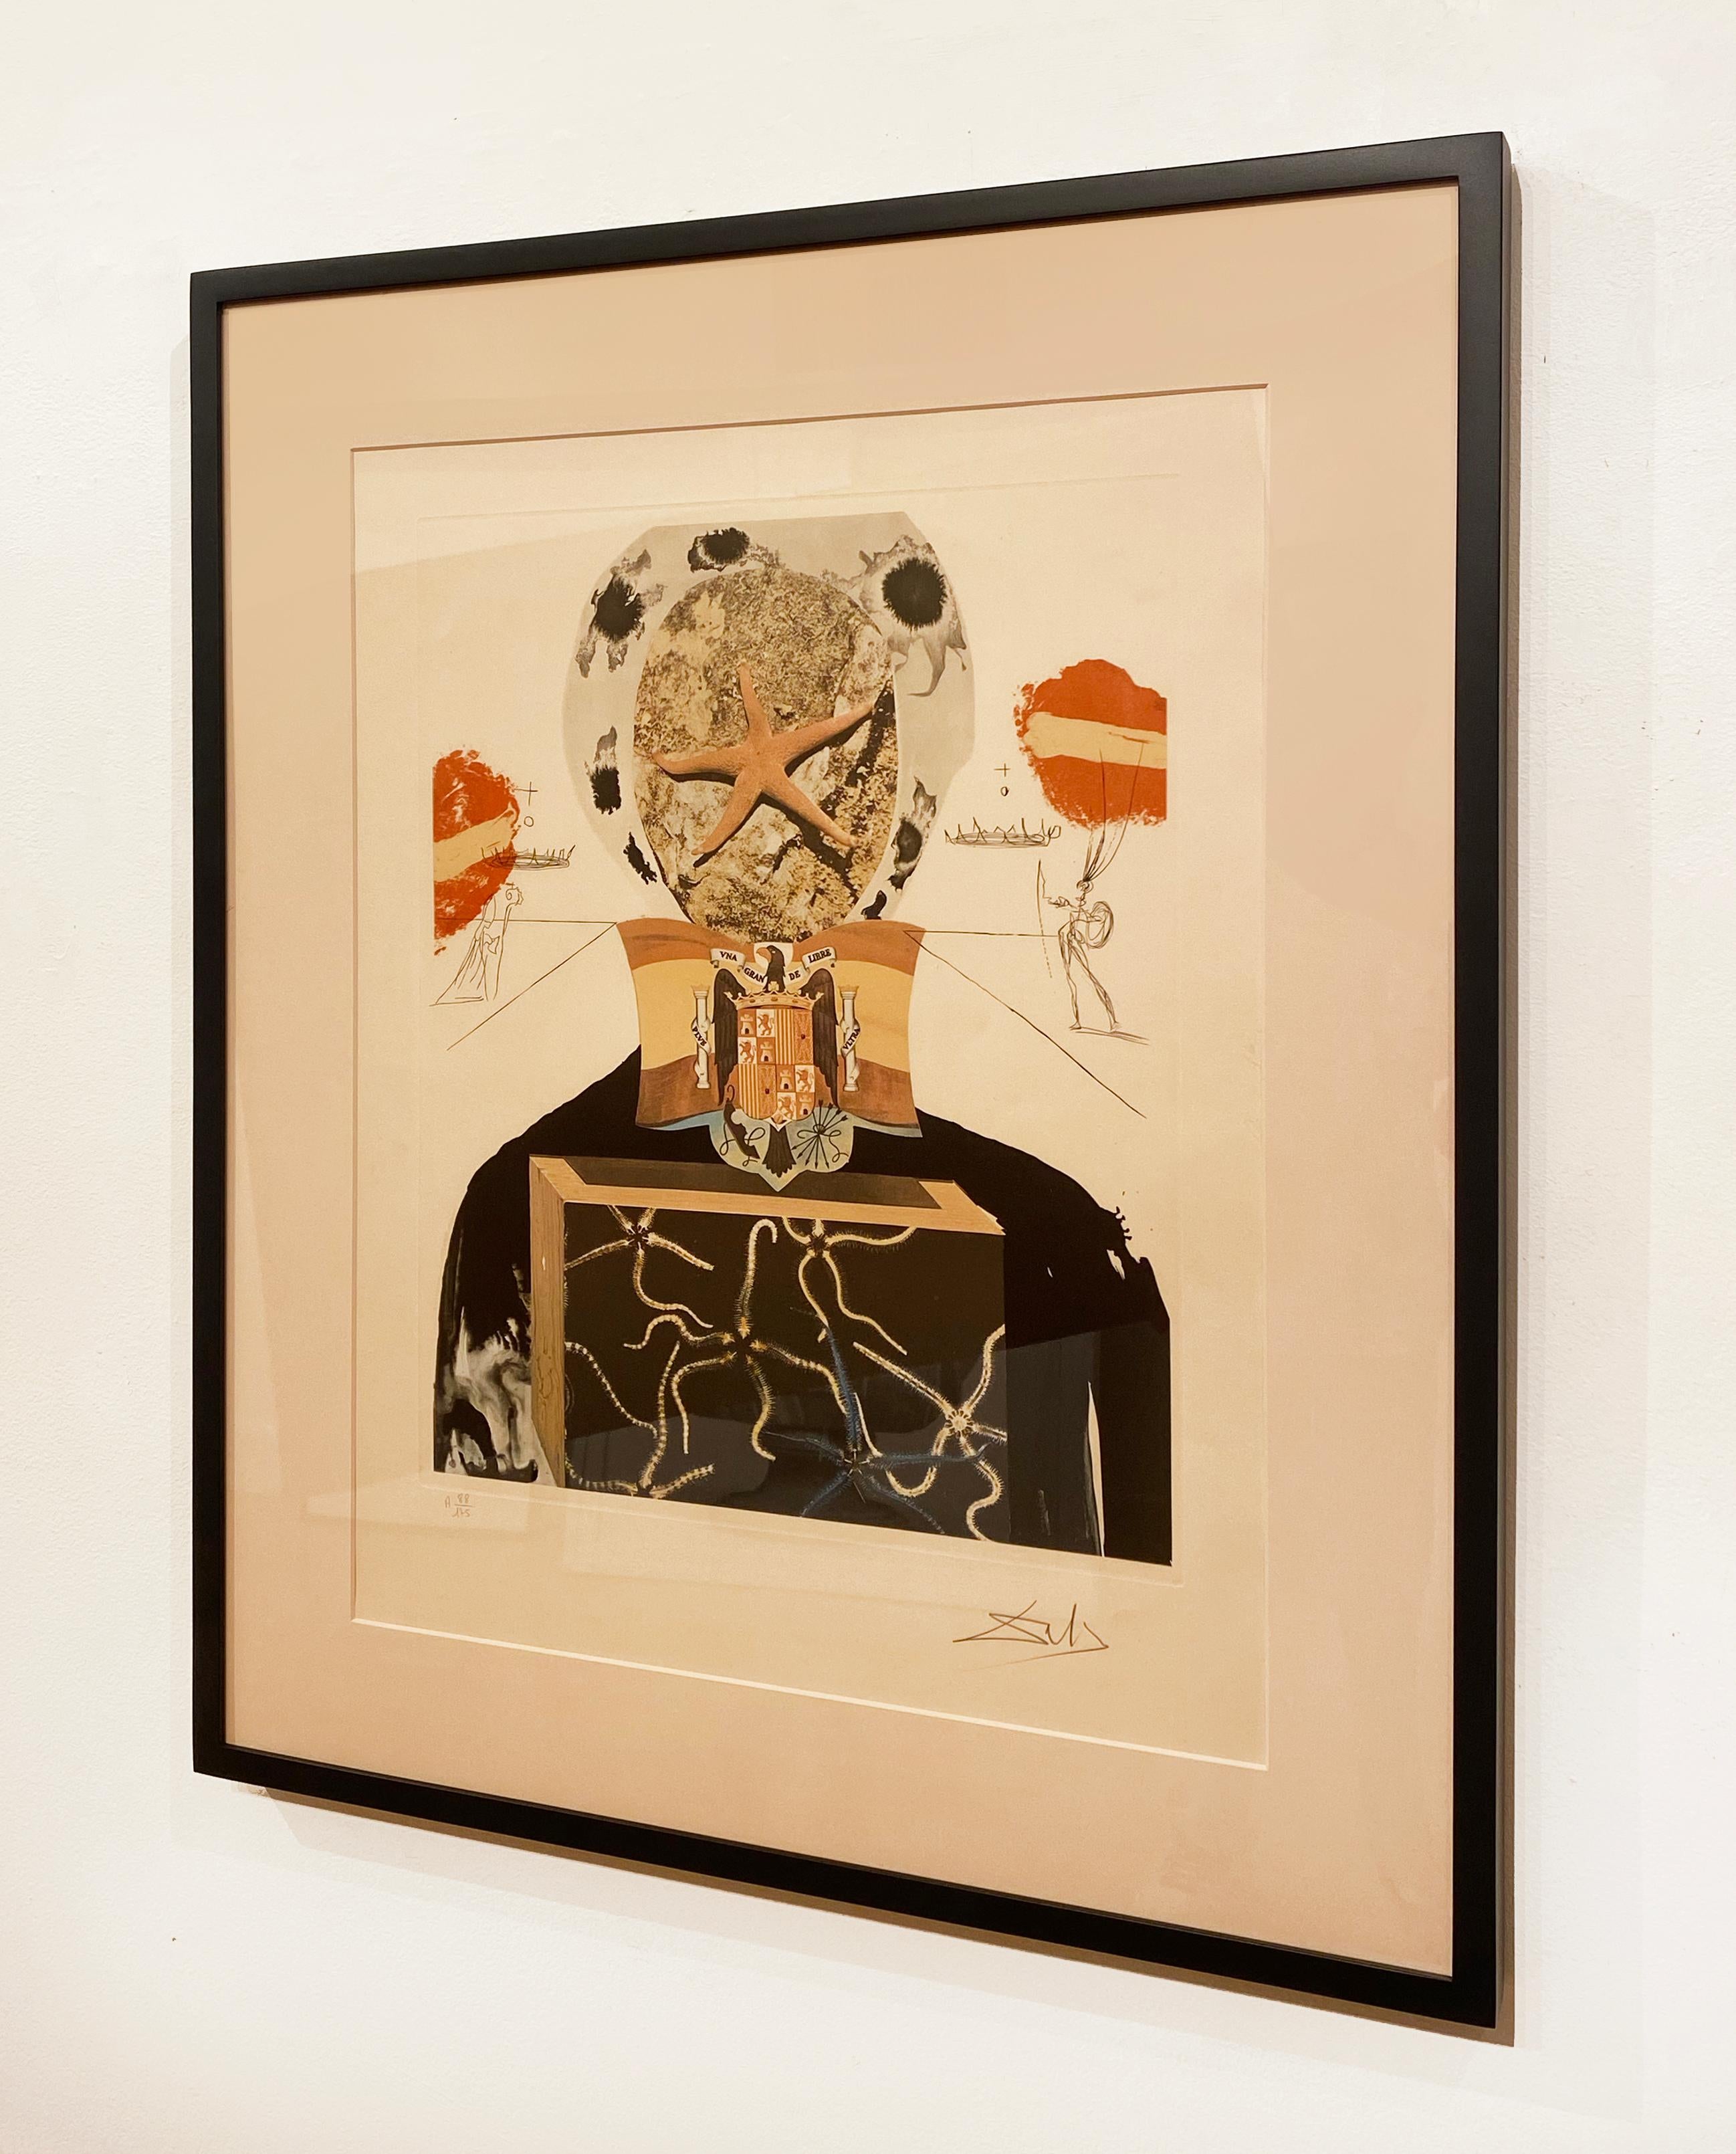 Artist:  Dali, Salvador
Title:  Surrealist King
Series:  Memories of Surrealism
Date:  1971
Medium:  Lithograph with Etching
Framed Dimensions:  37.25